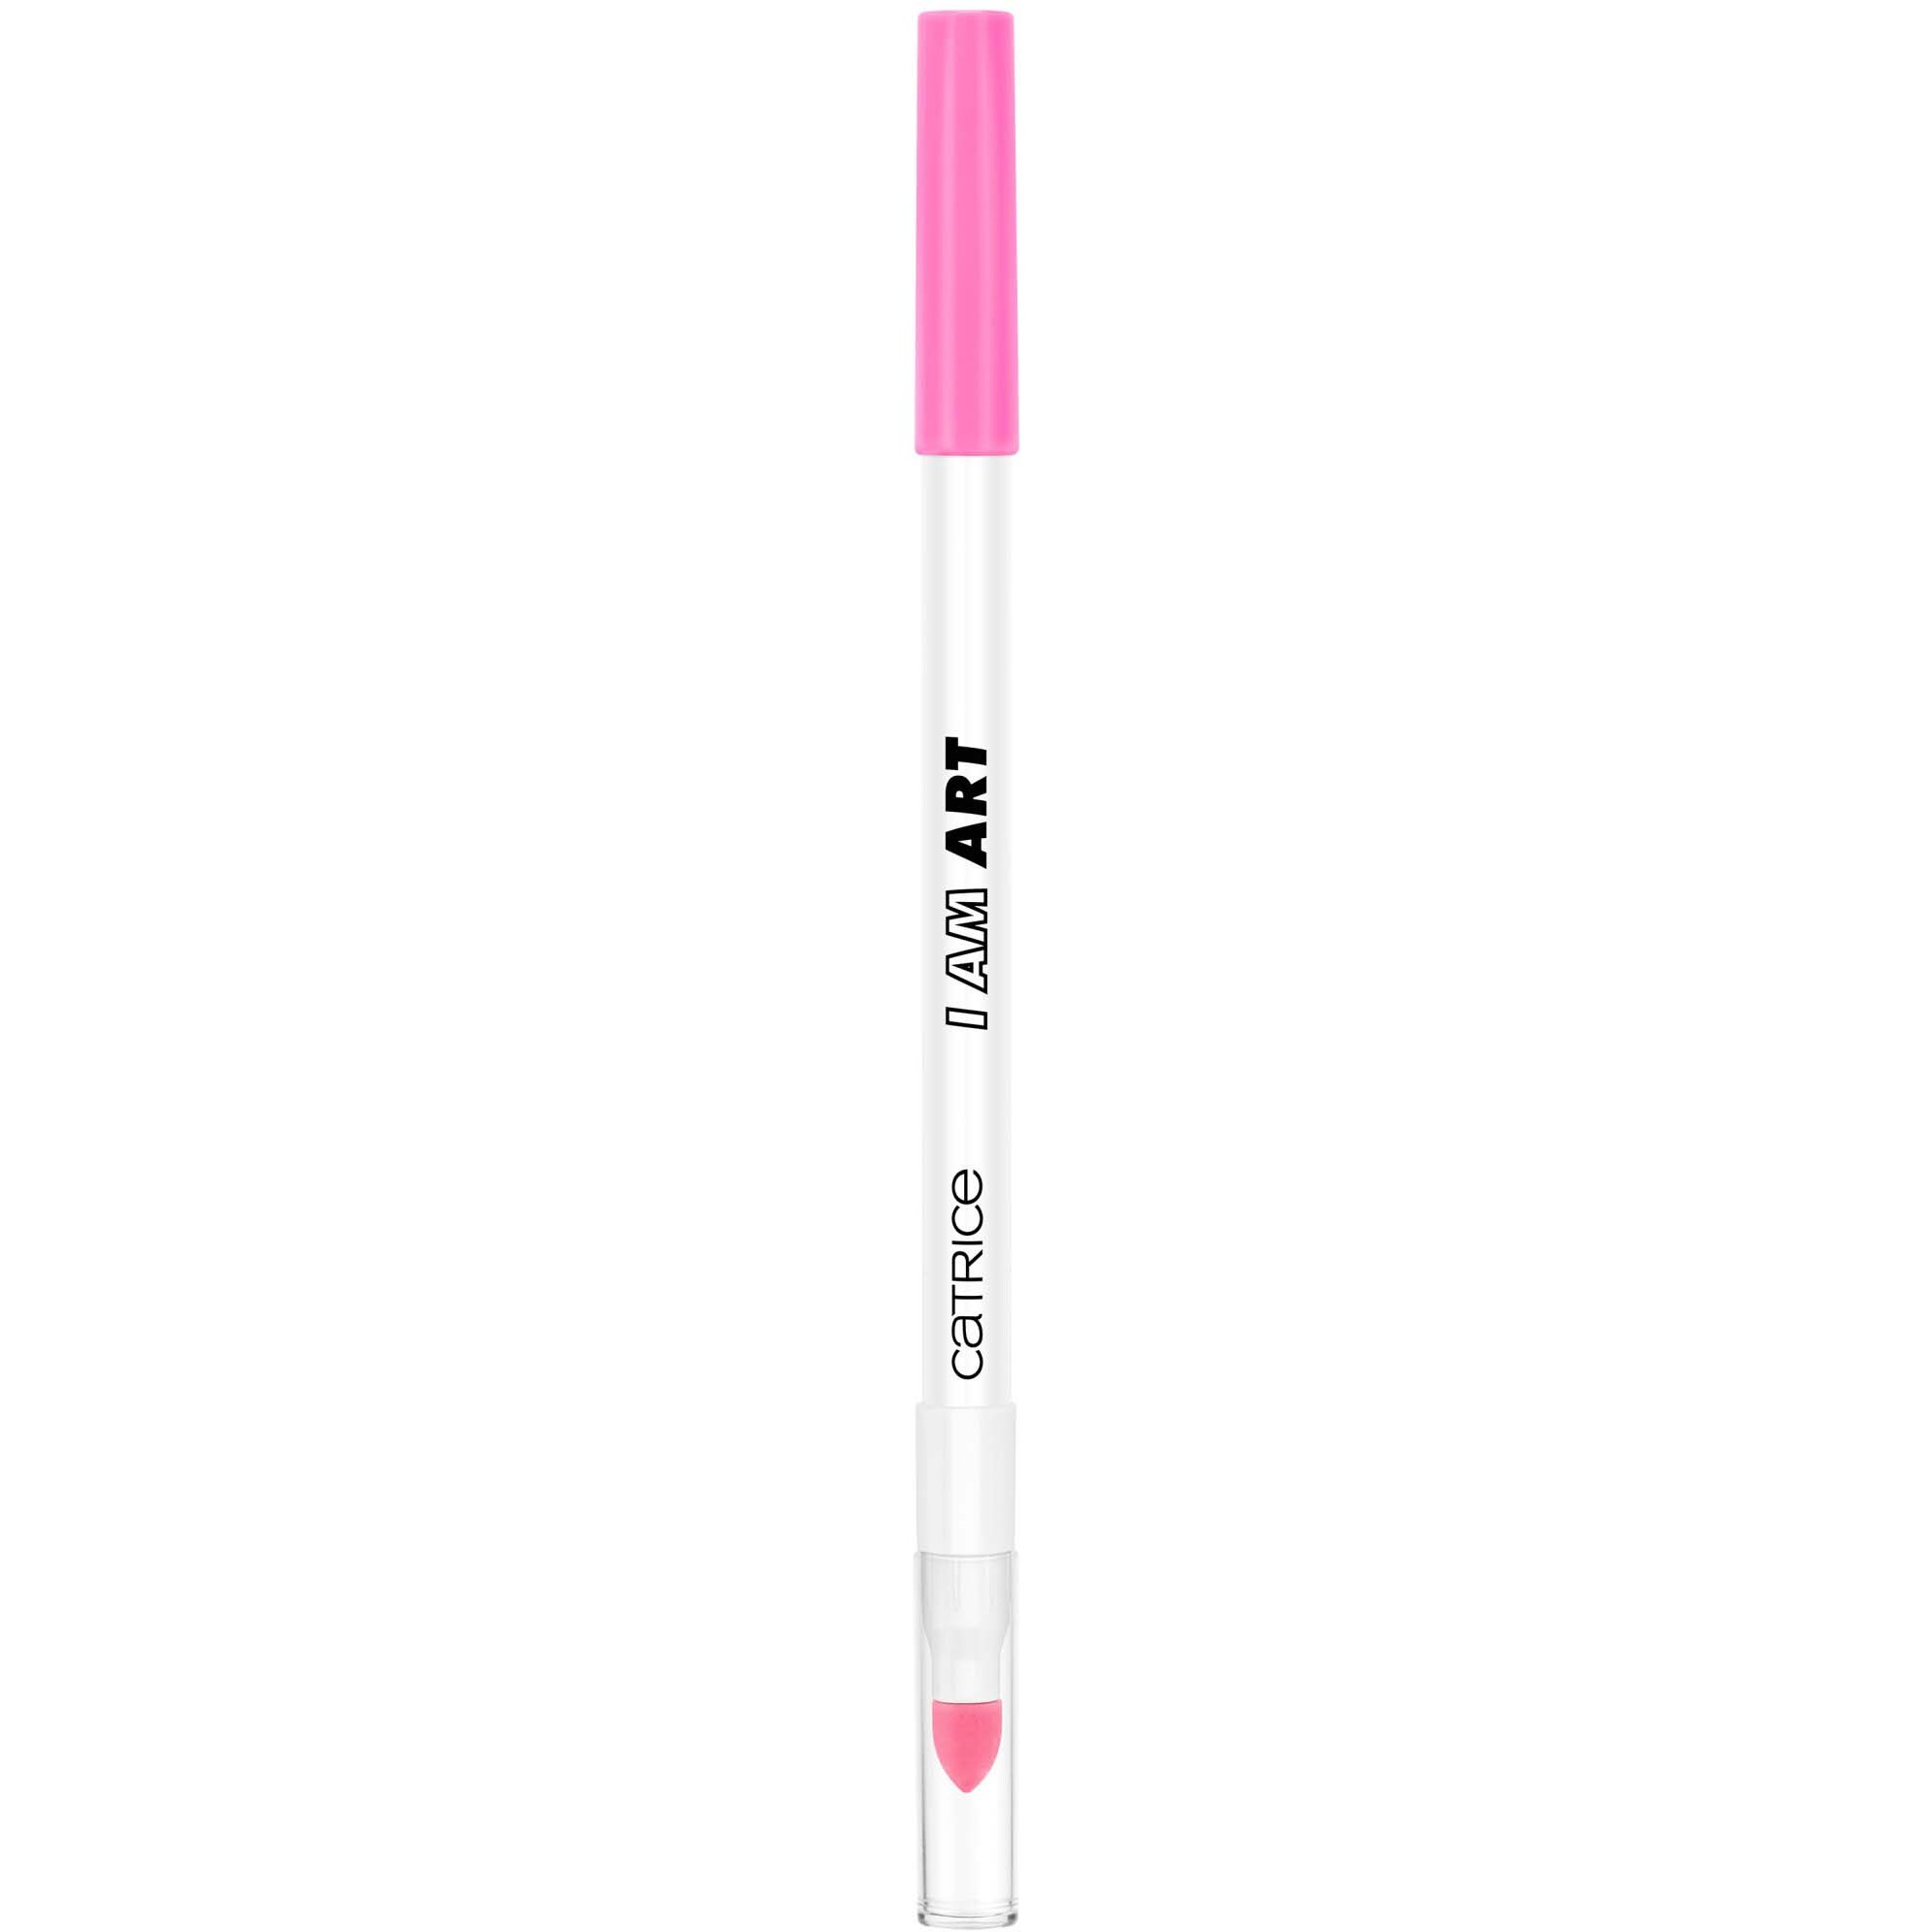 Läs mer om Catrice WHO I AM Double Ended Eye Pencil C01 I Am Art